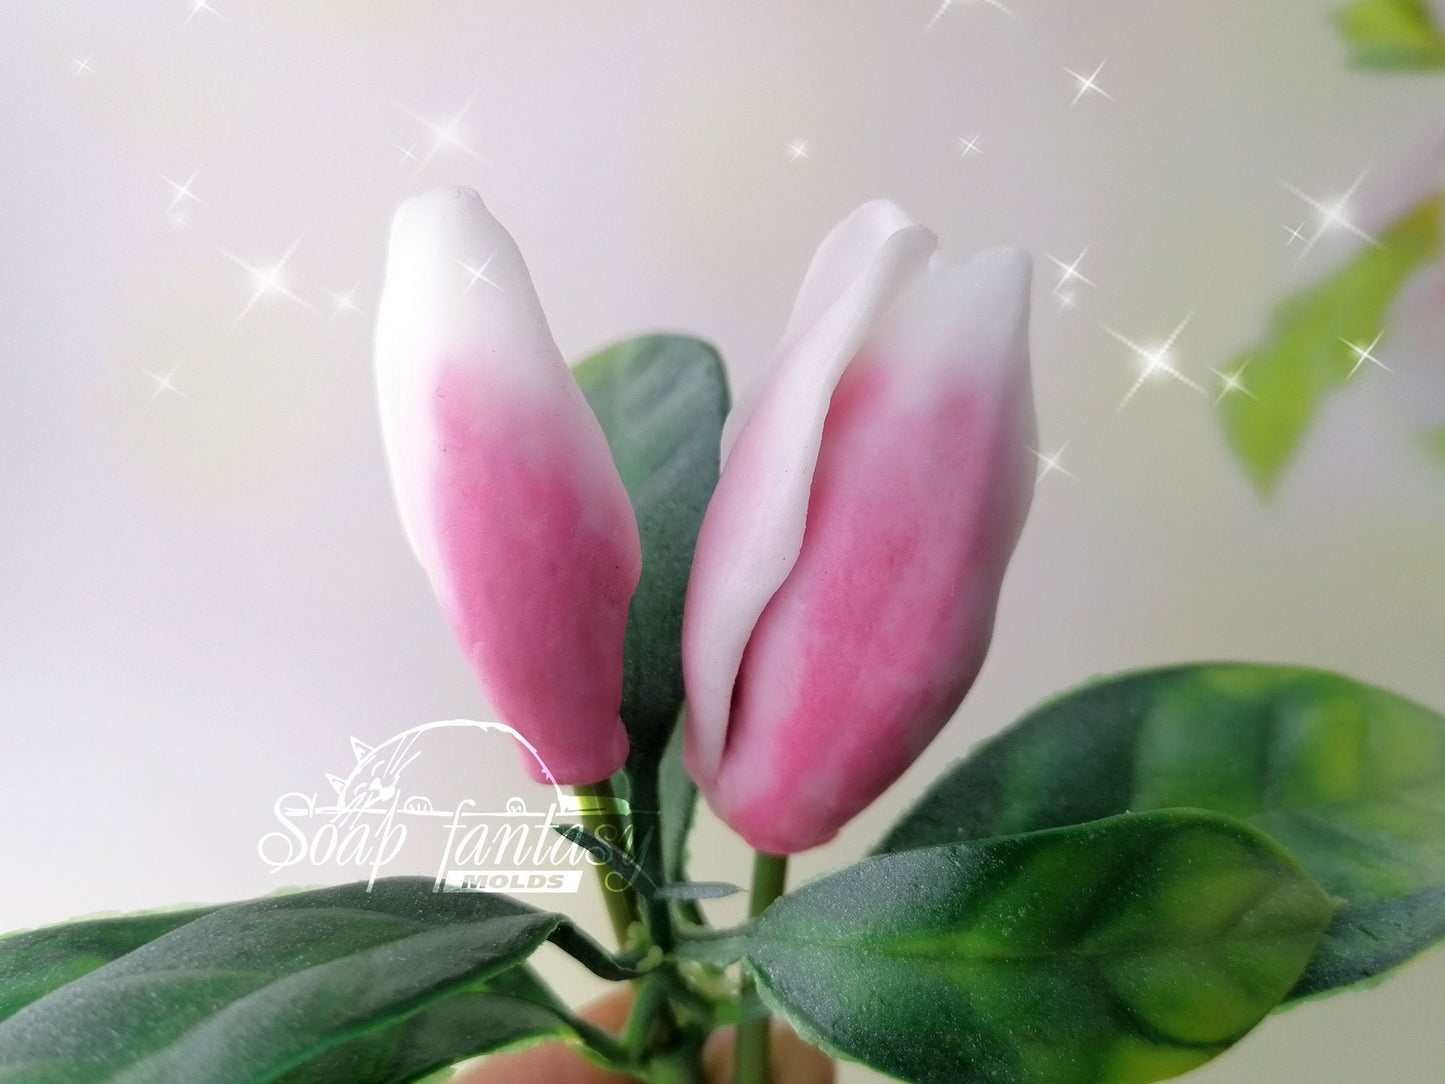 Magnolia soulangeana buds #2-3 silicone mold for soap making